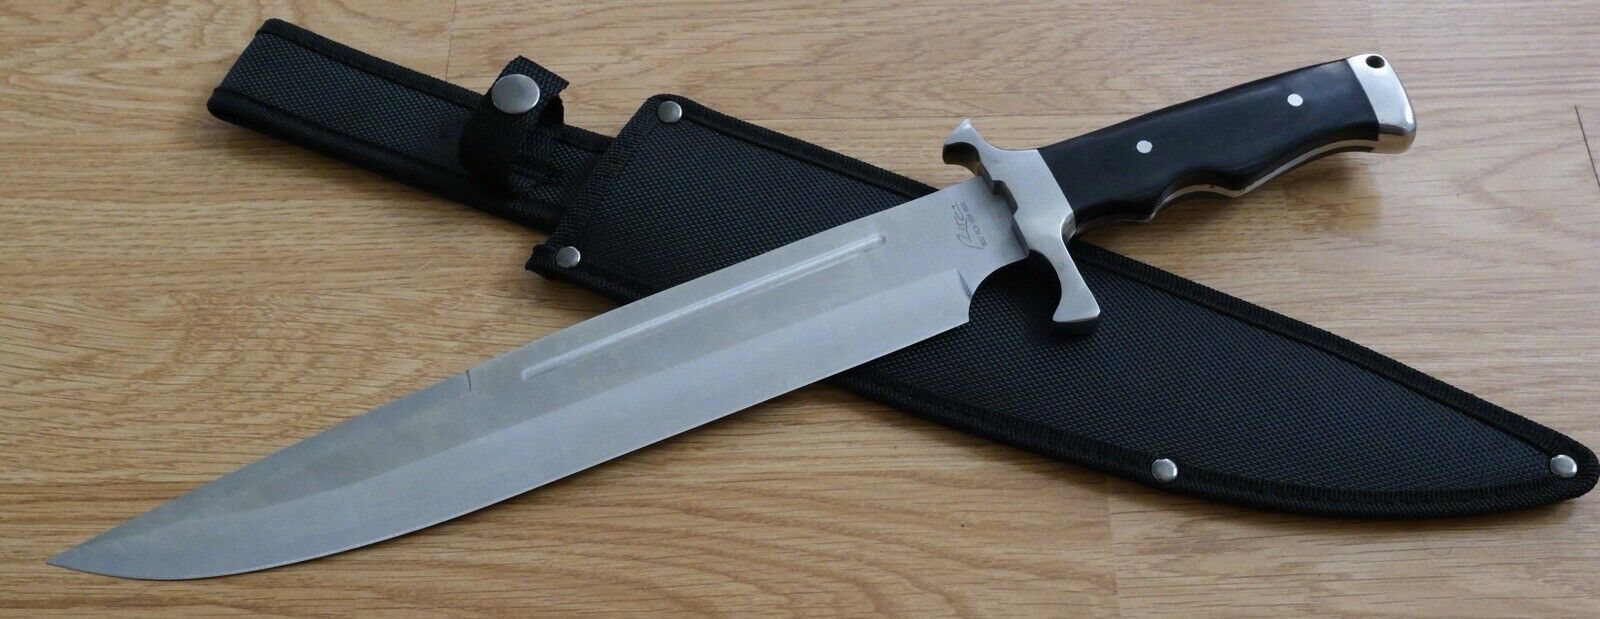 17” Survival Knife XL Bowie Full Tang 440 Stainless Steel Sharp Extra Large Big